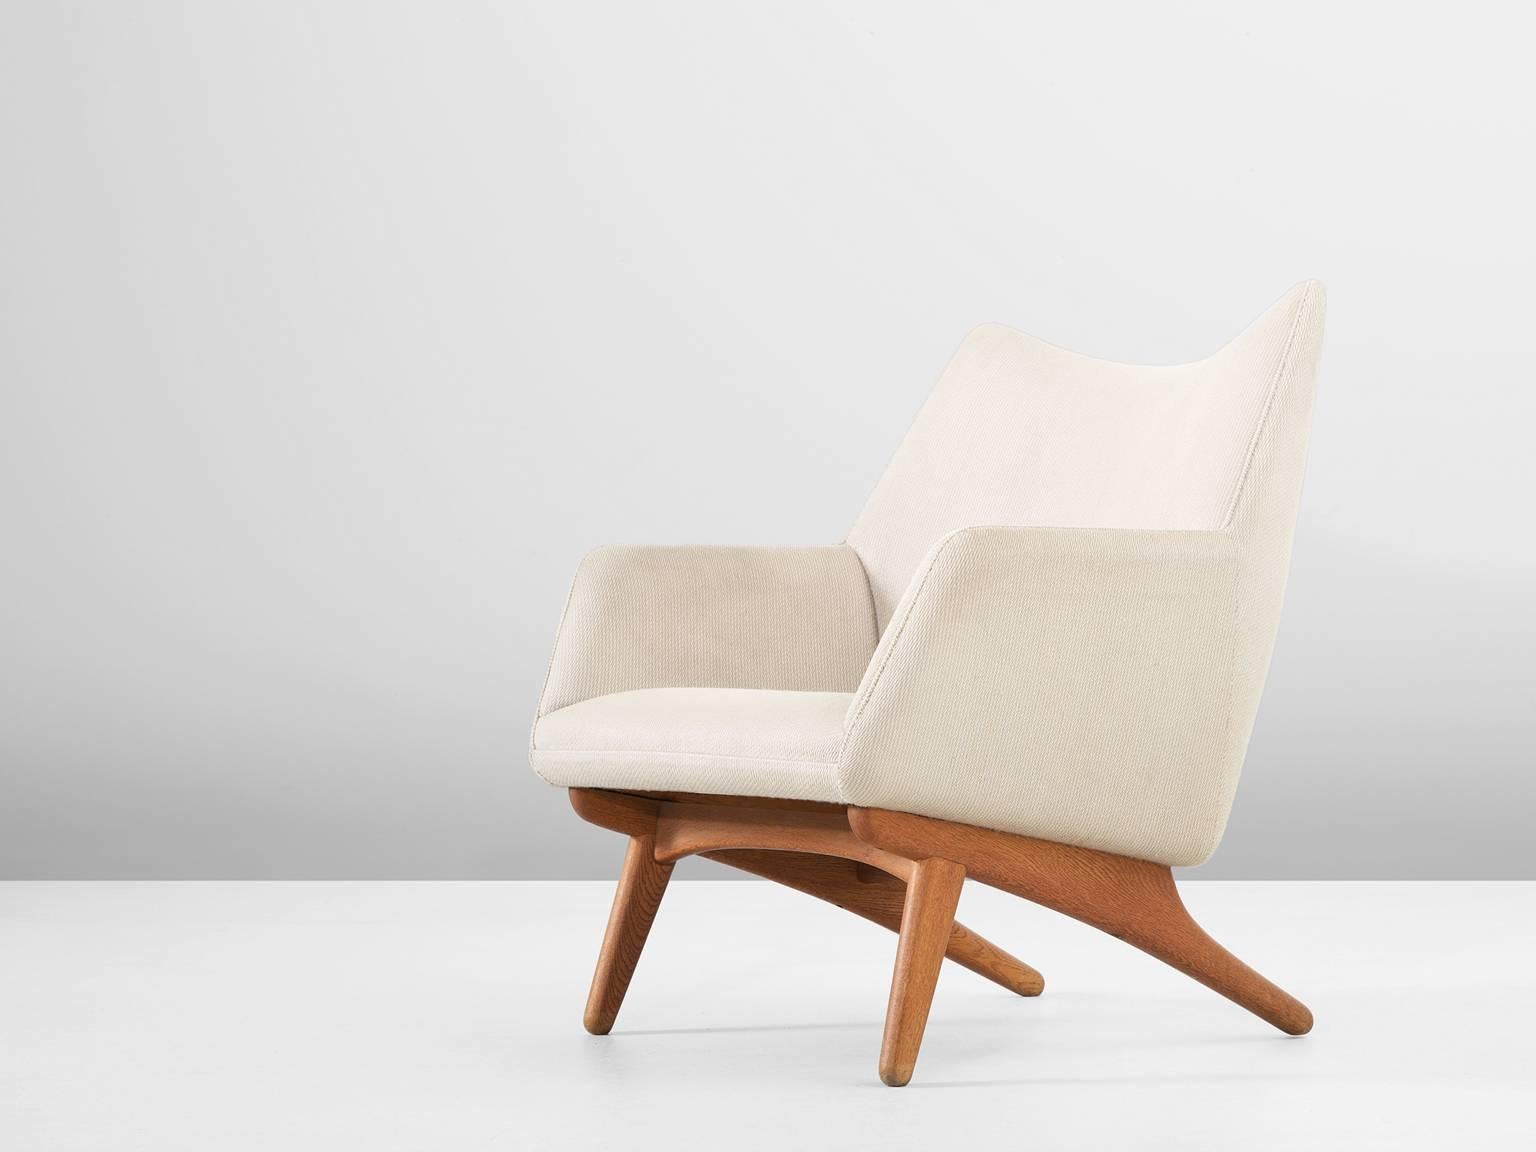 Lounge chairs, in teak and fabric, Denmark, 1960s. 

Easy chair with elegant teak legs and off-white upholstery. This chairs shows elegant lines and curves. The design is simplistic, yet characteristic as Danish Modern. 

Reupholstery is